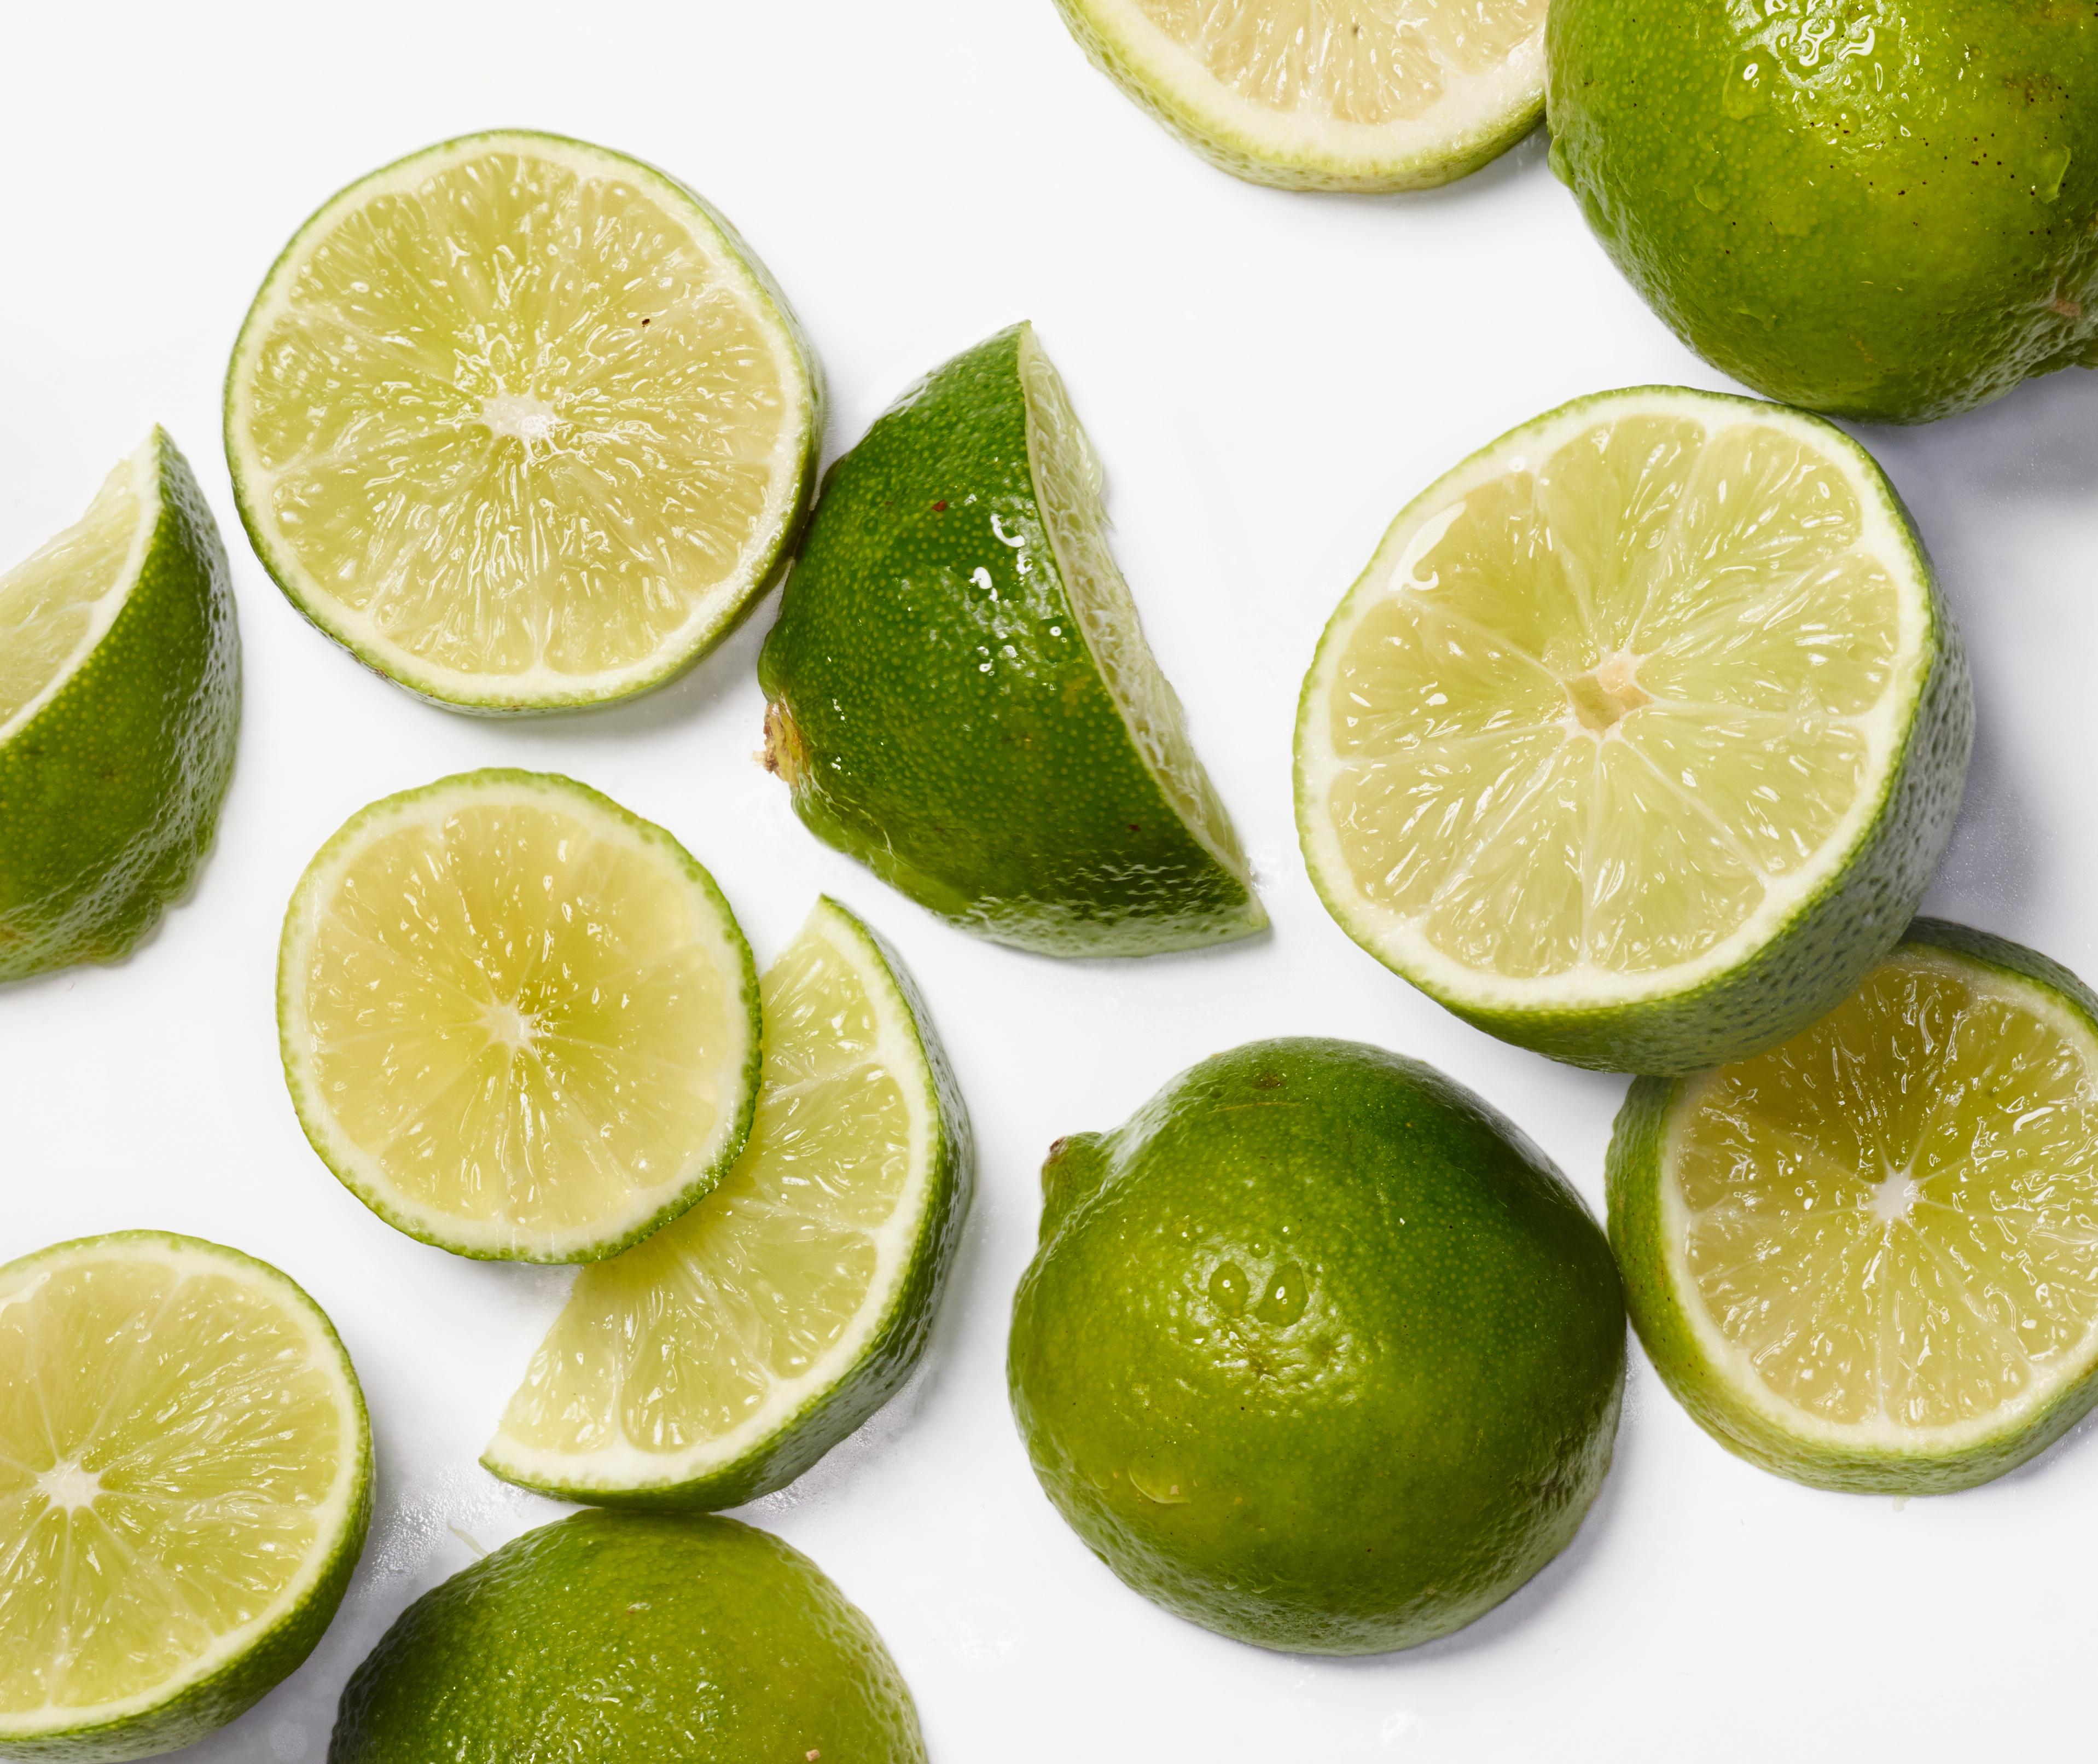 Sliced limes. | Source: Getty Images